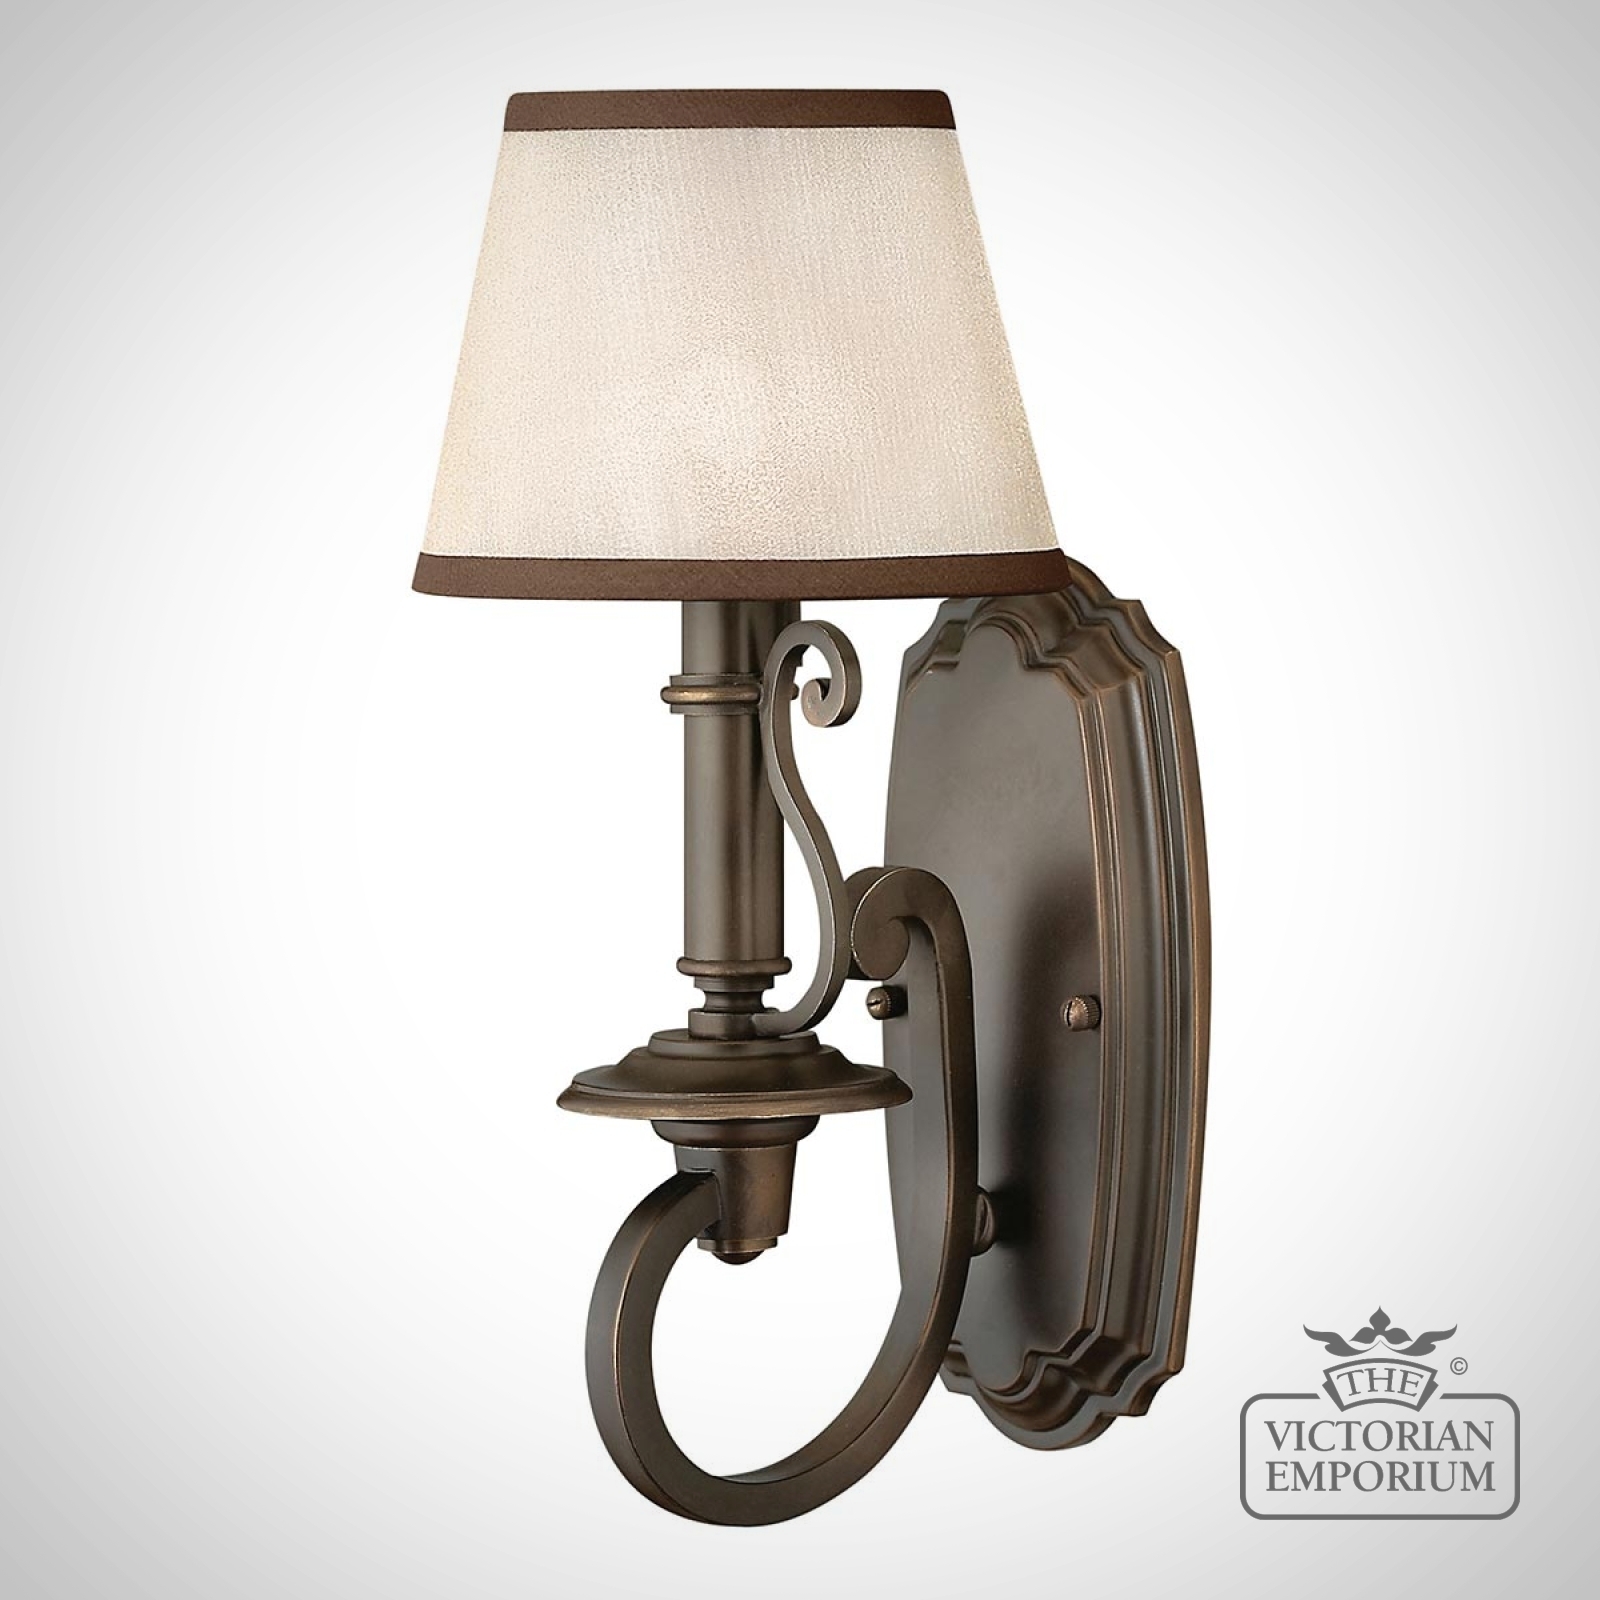 Plymouth Wall Sconce in Olde Bronze